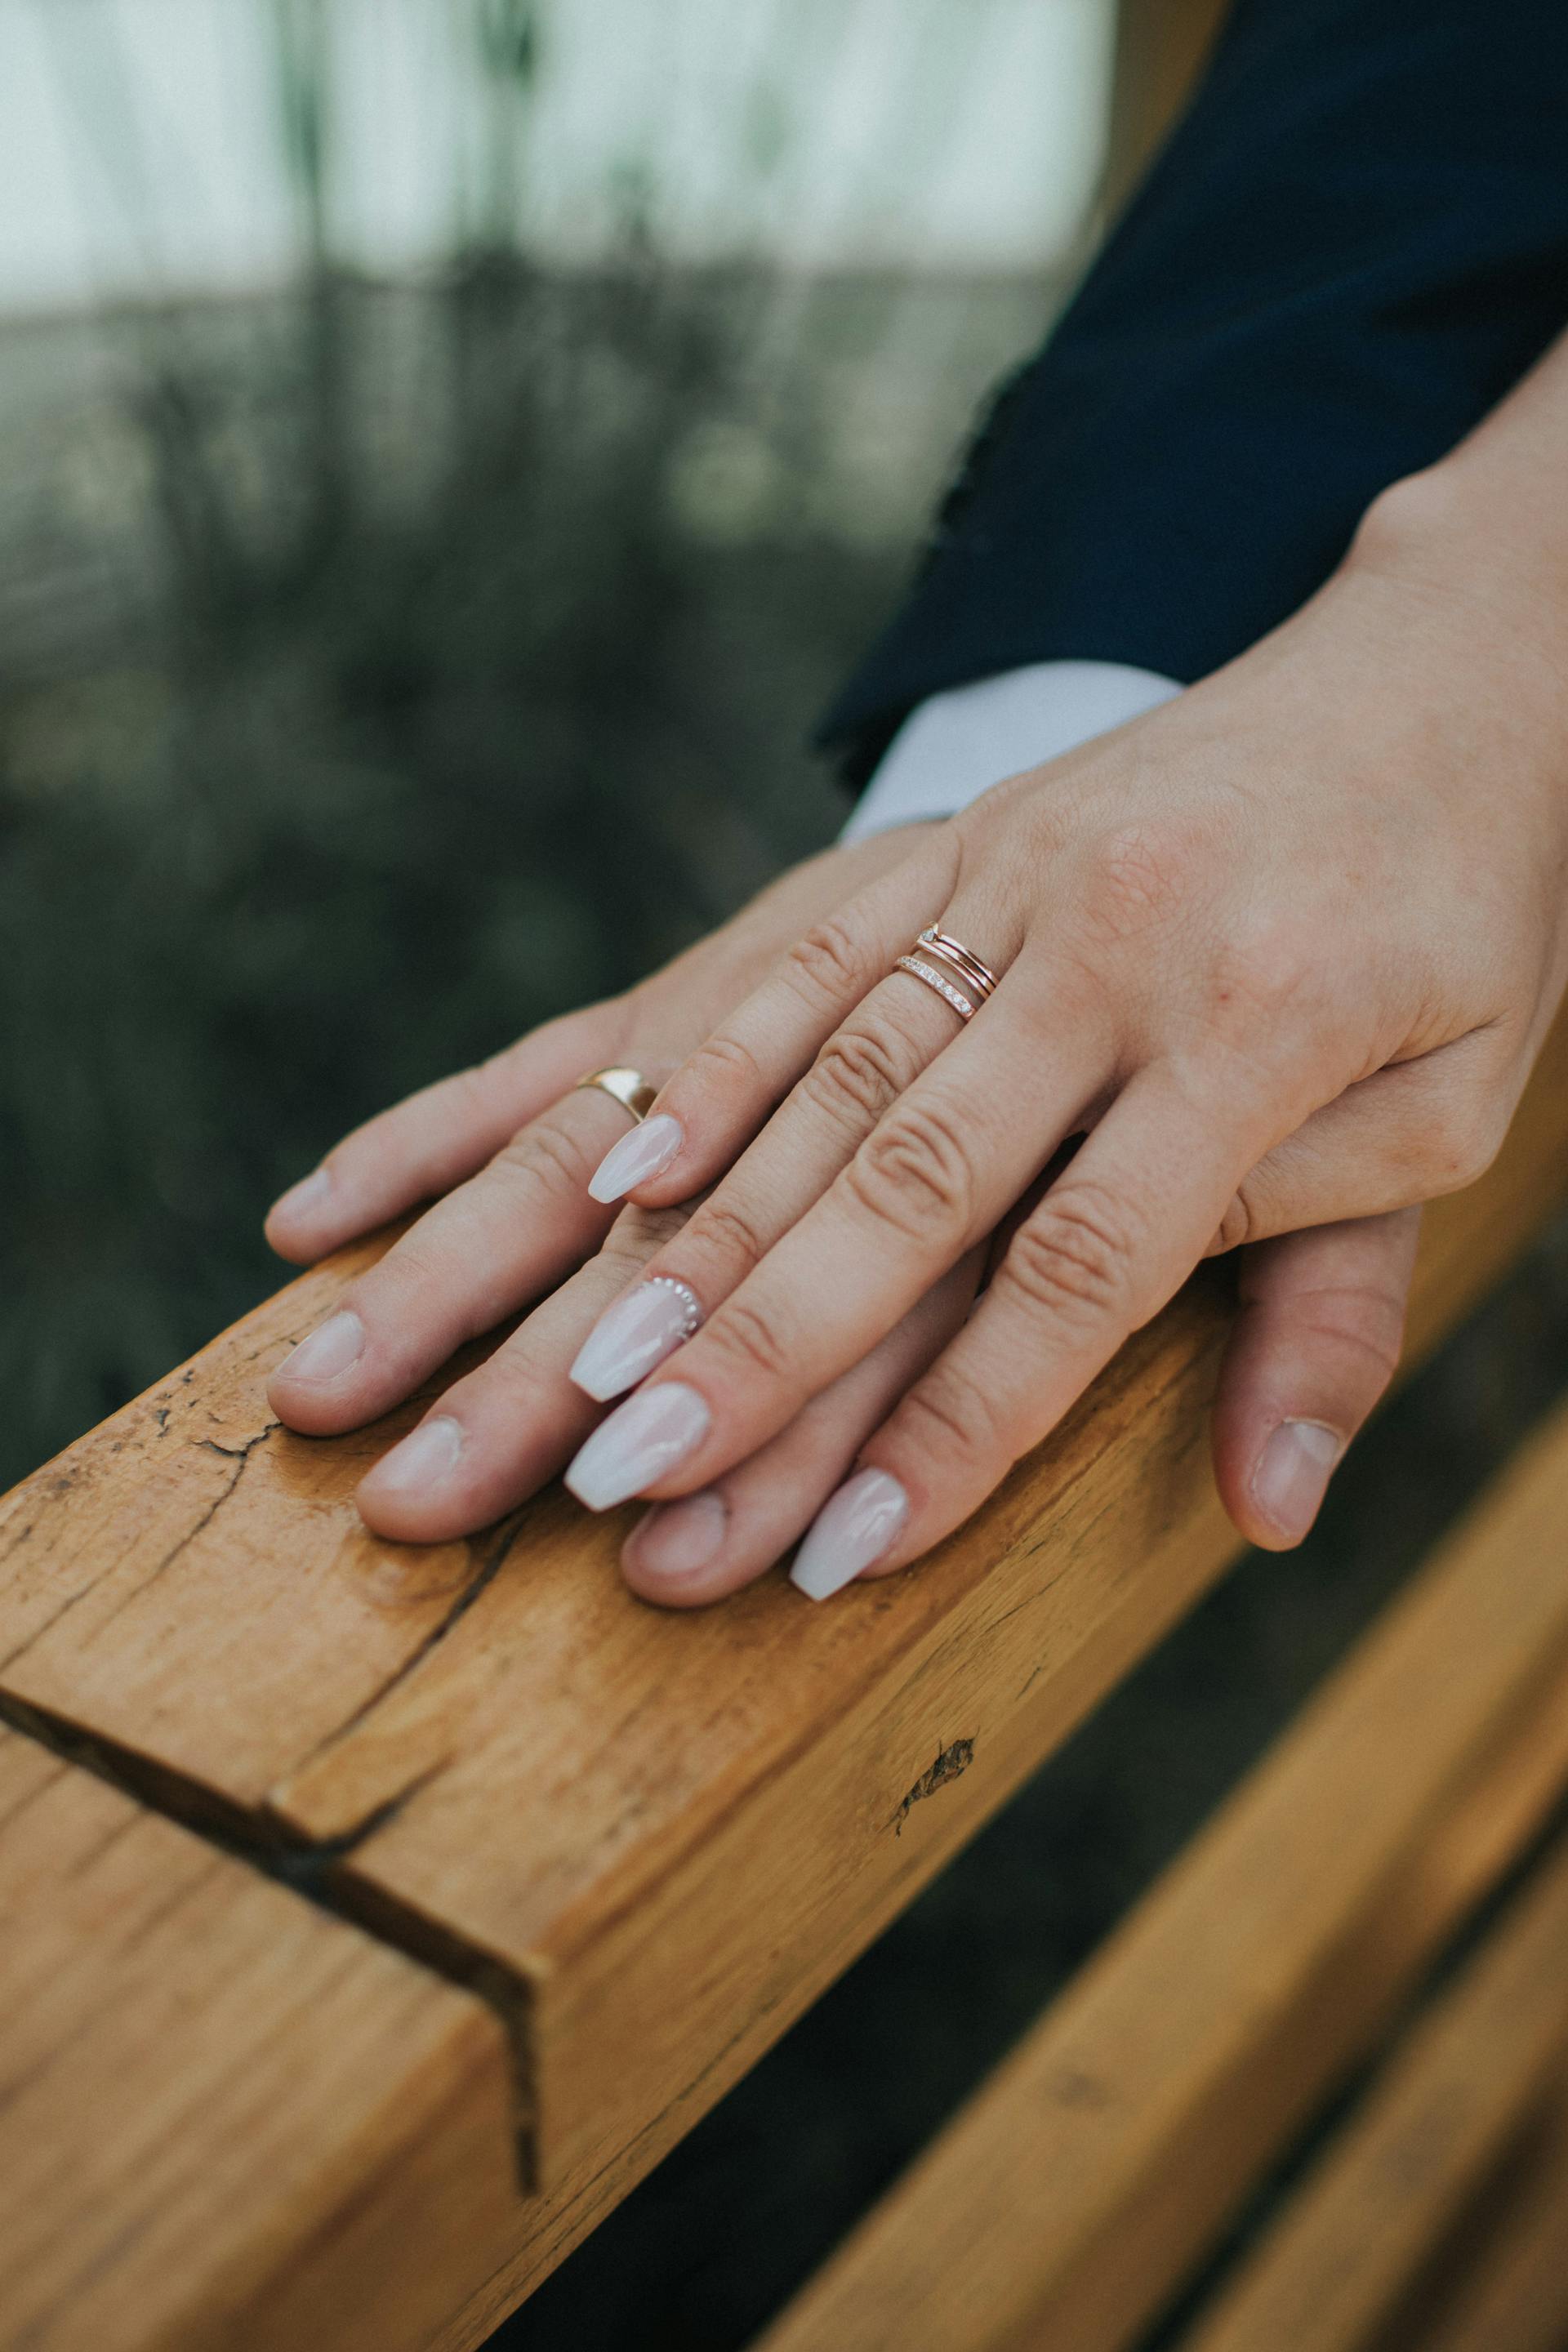 A close-up of wedding rings | Source: Pexels